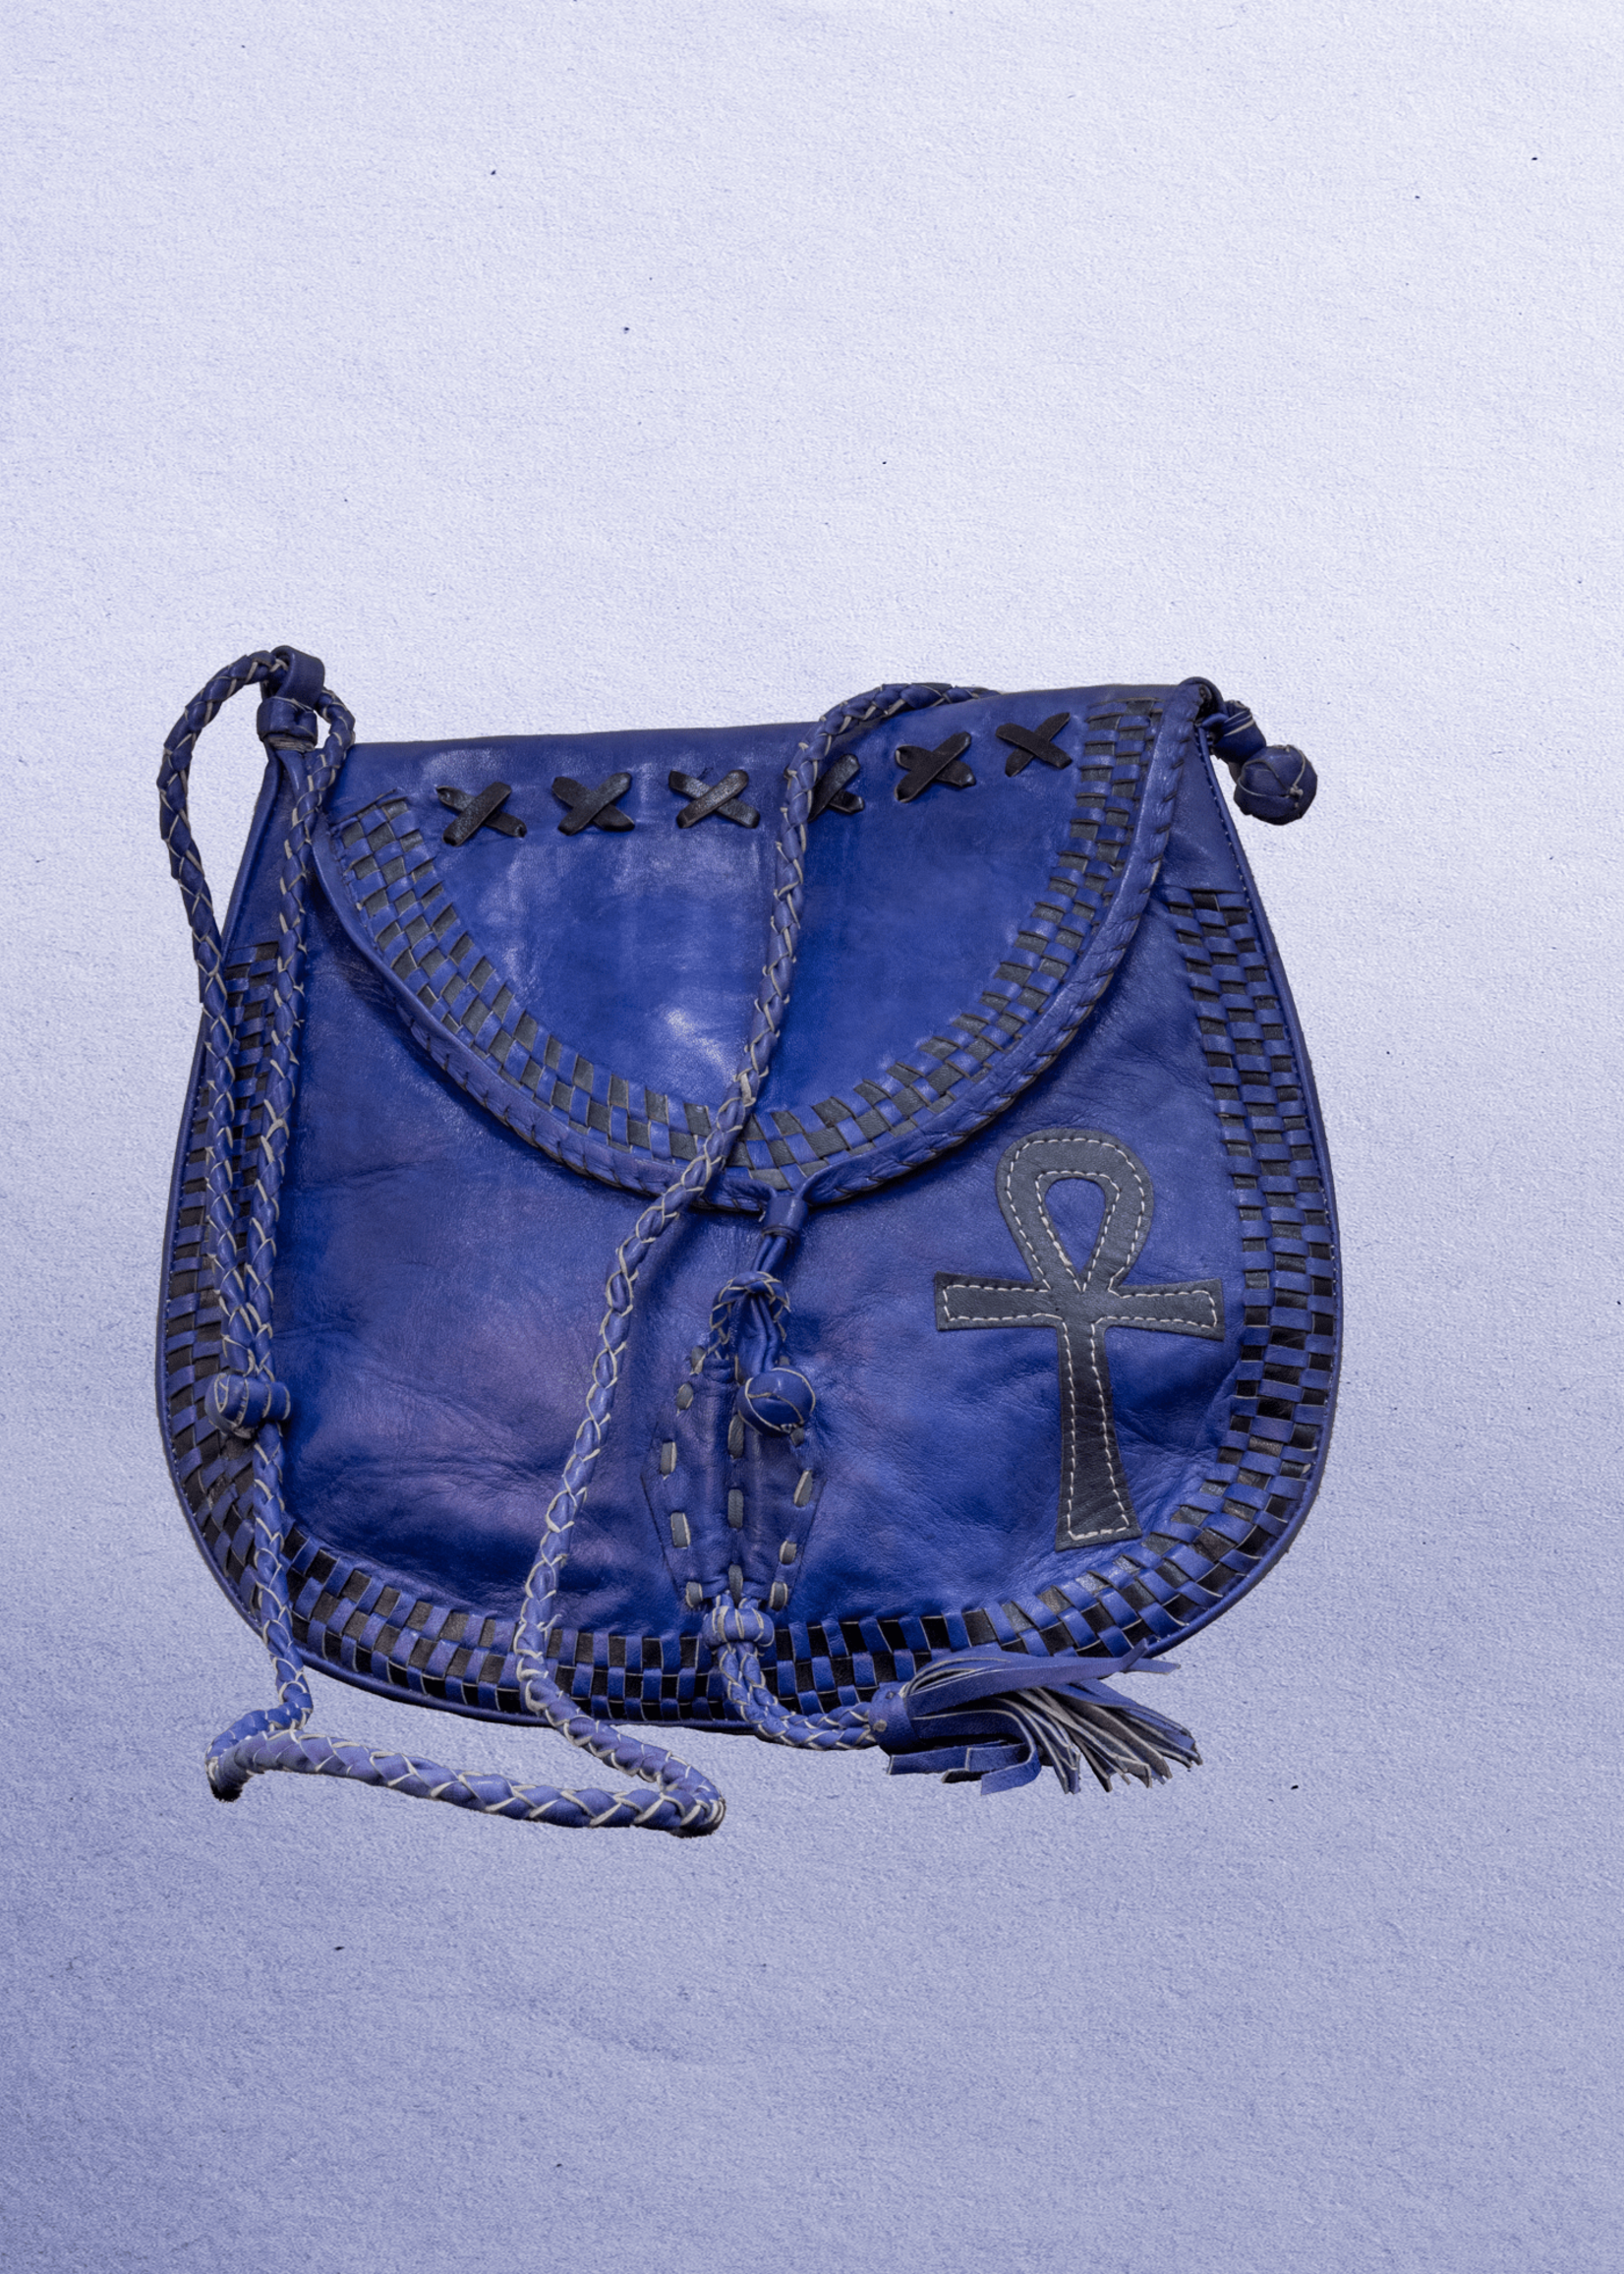 Mali Beautiful cross-body leather bag. Has braided leather straps with Ankh adornment. Inside and outside pockets.